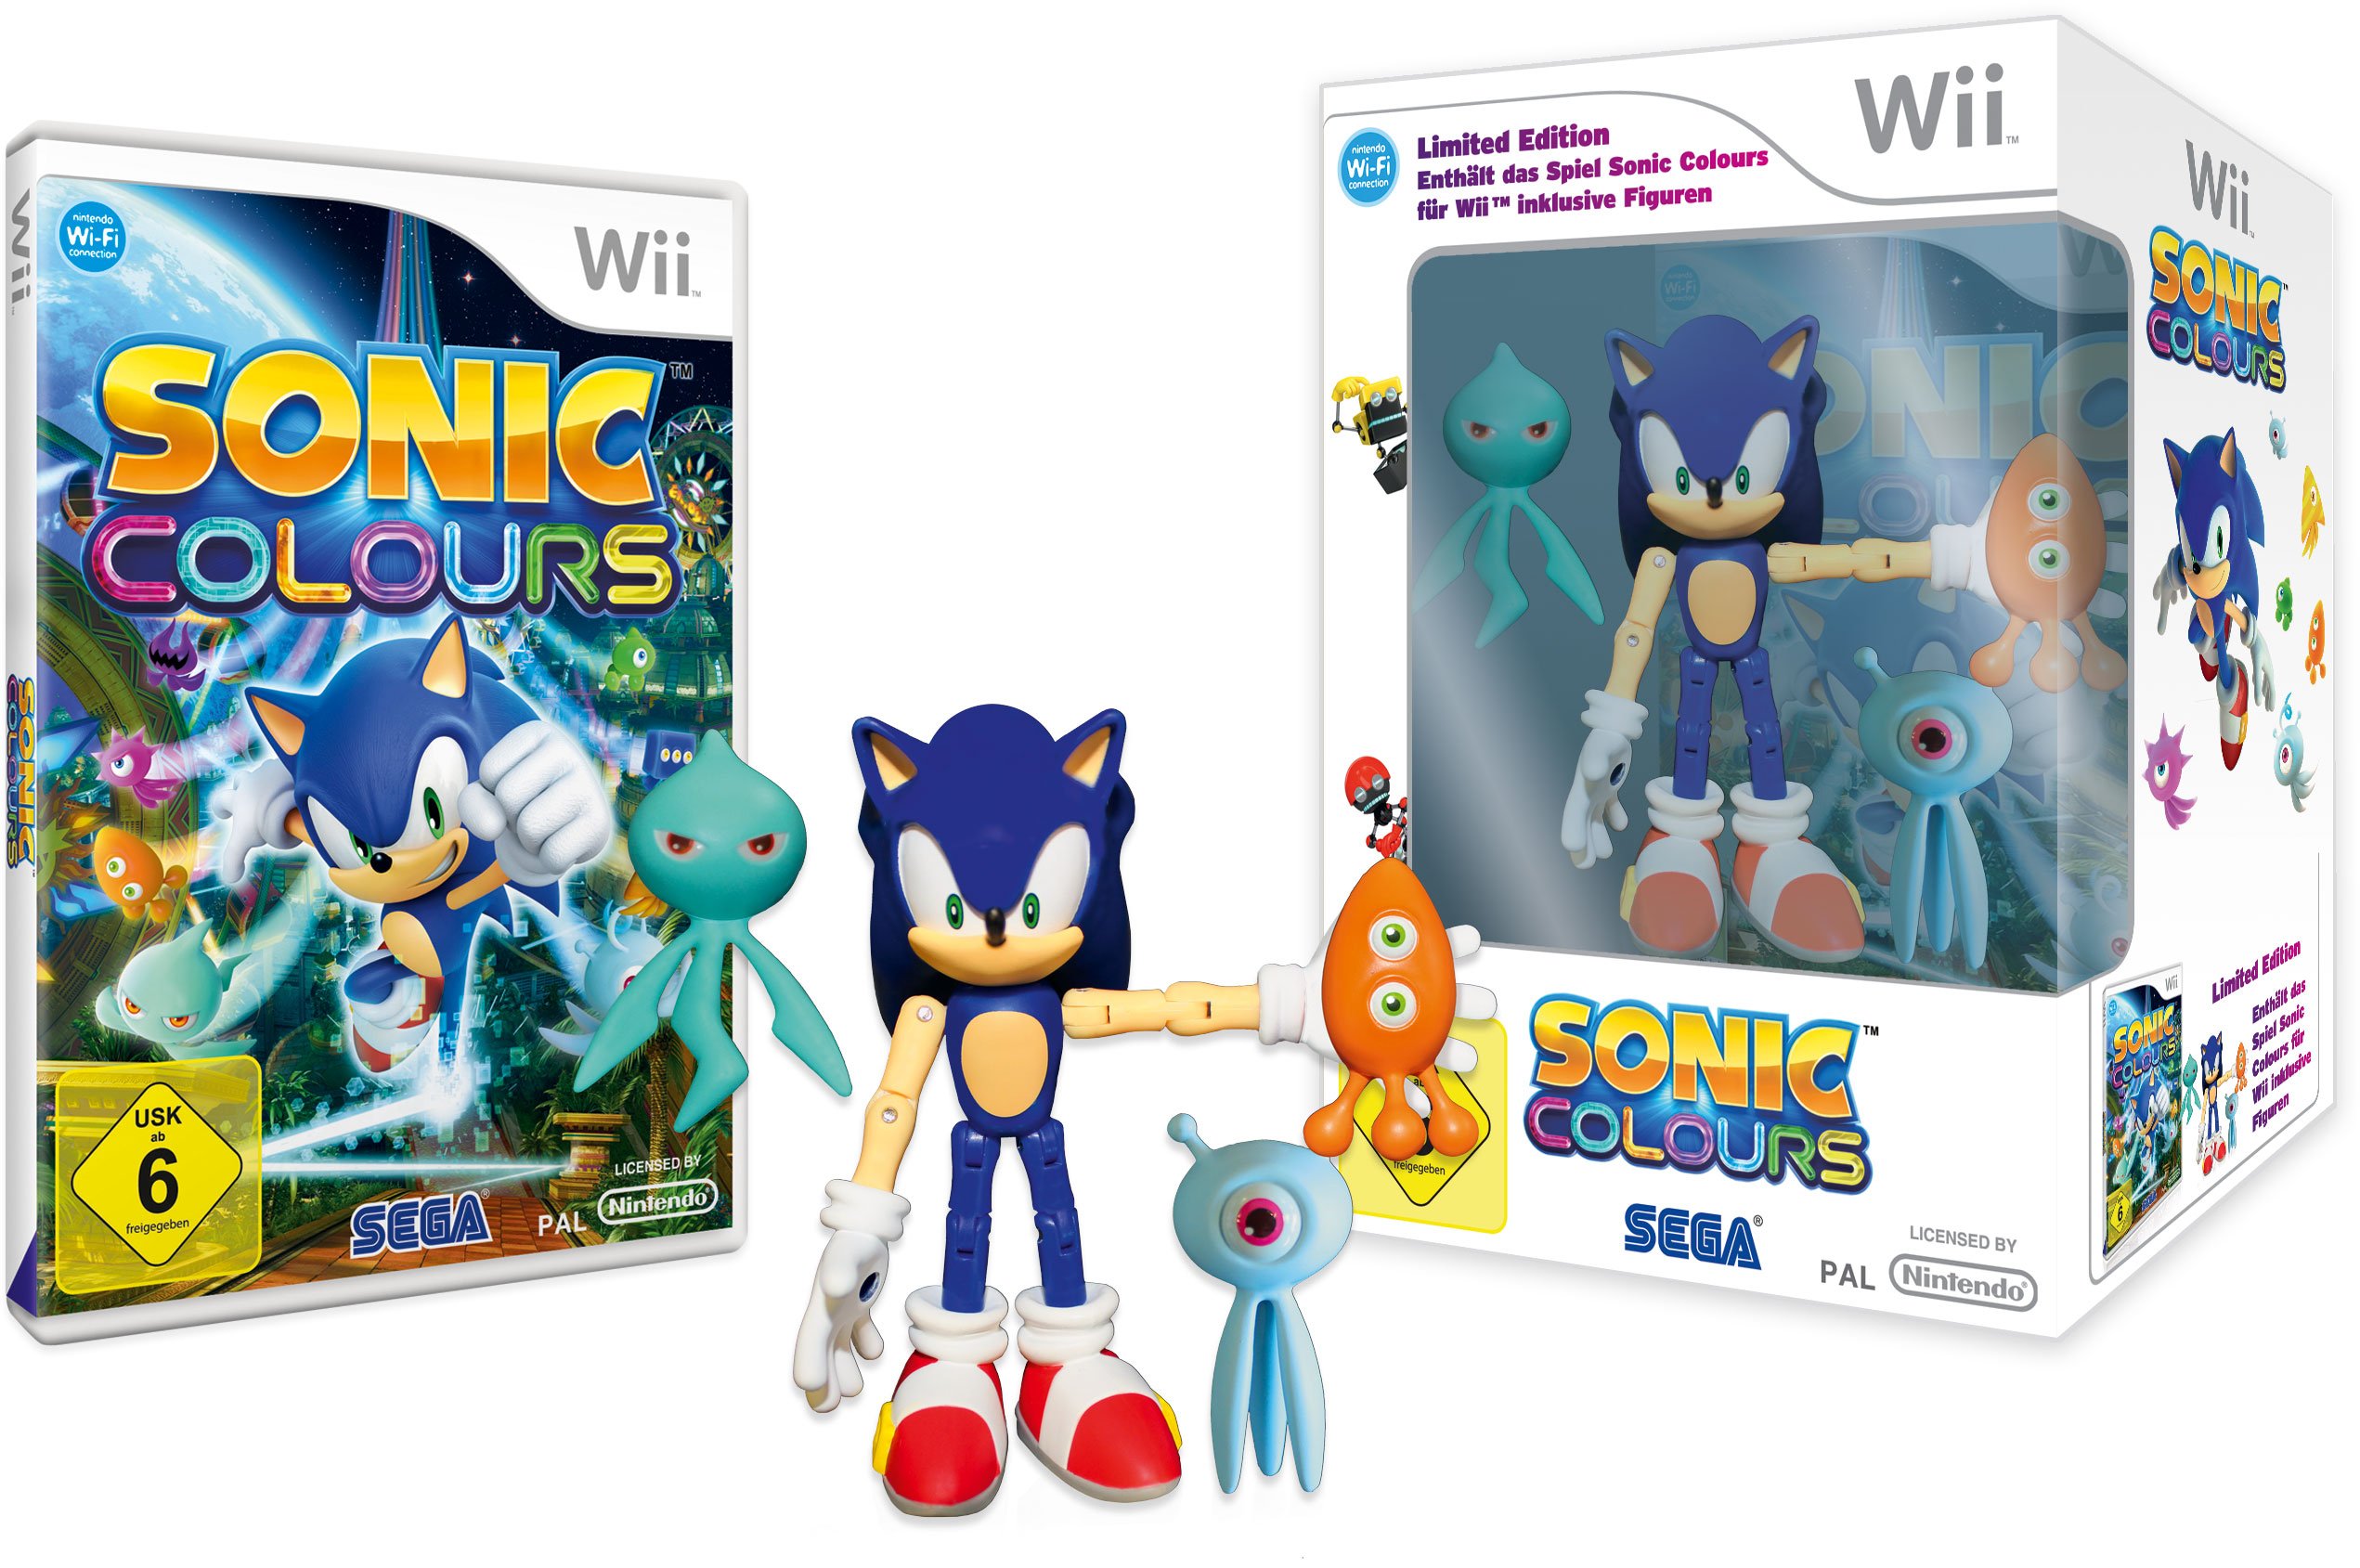 Sonic Boom: Shattered Crystal and Rise of Lyric receive Nintendo eShop price  drops through March 21st » SEGAbits - #1 Source for SEGA News